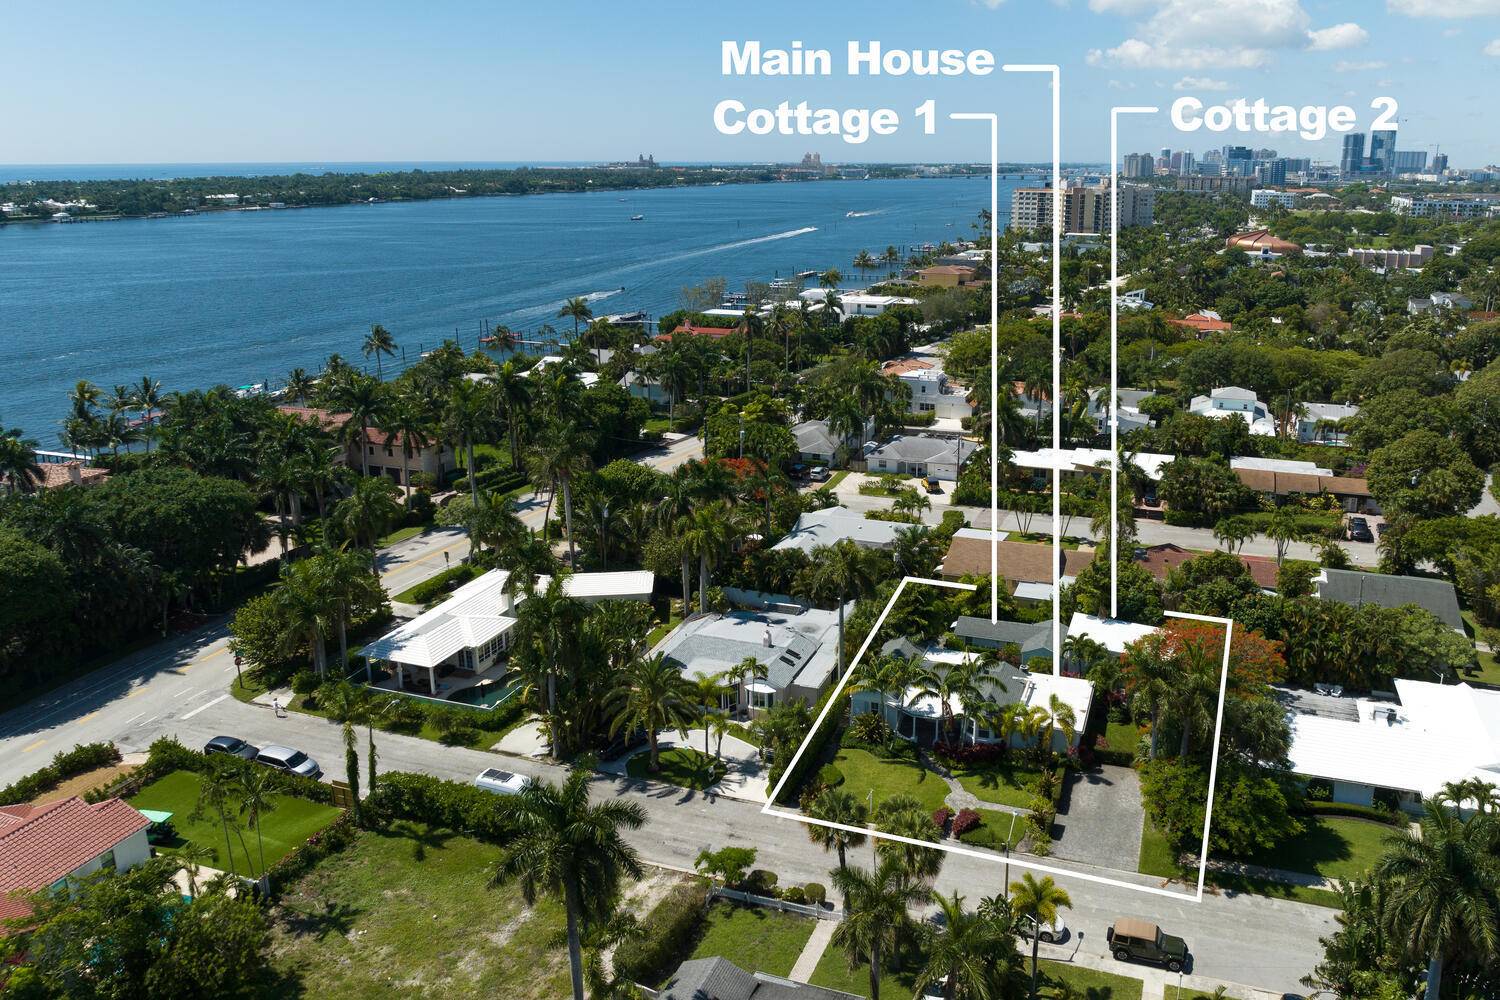 This is your opportunity to live in Northwood Shores which is one of the most desirable communities in West Palm Beach.